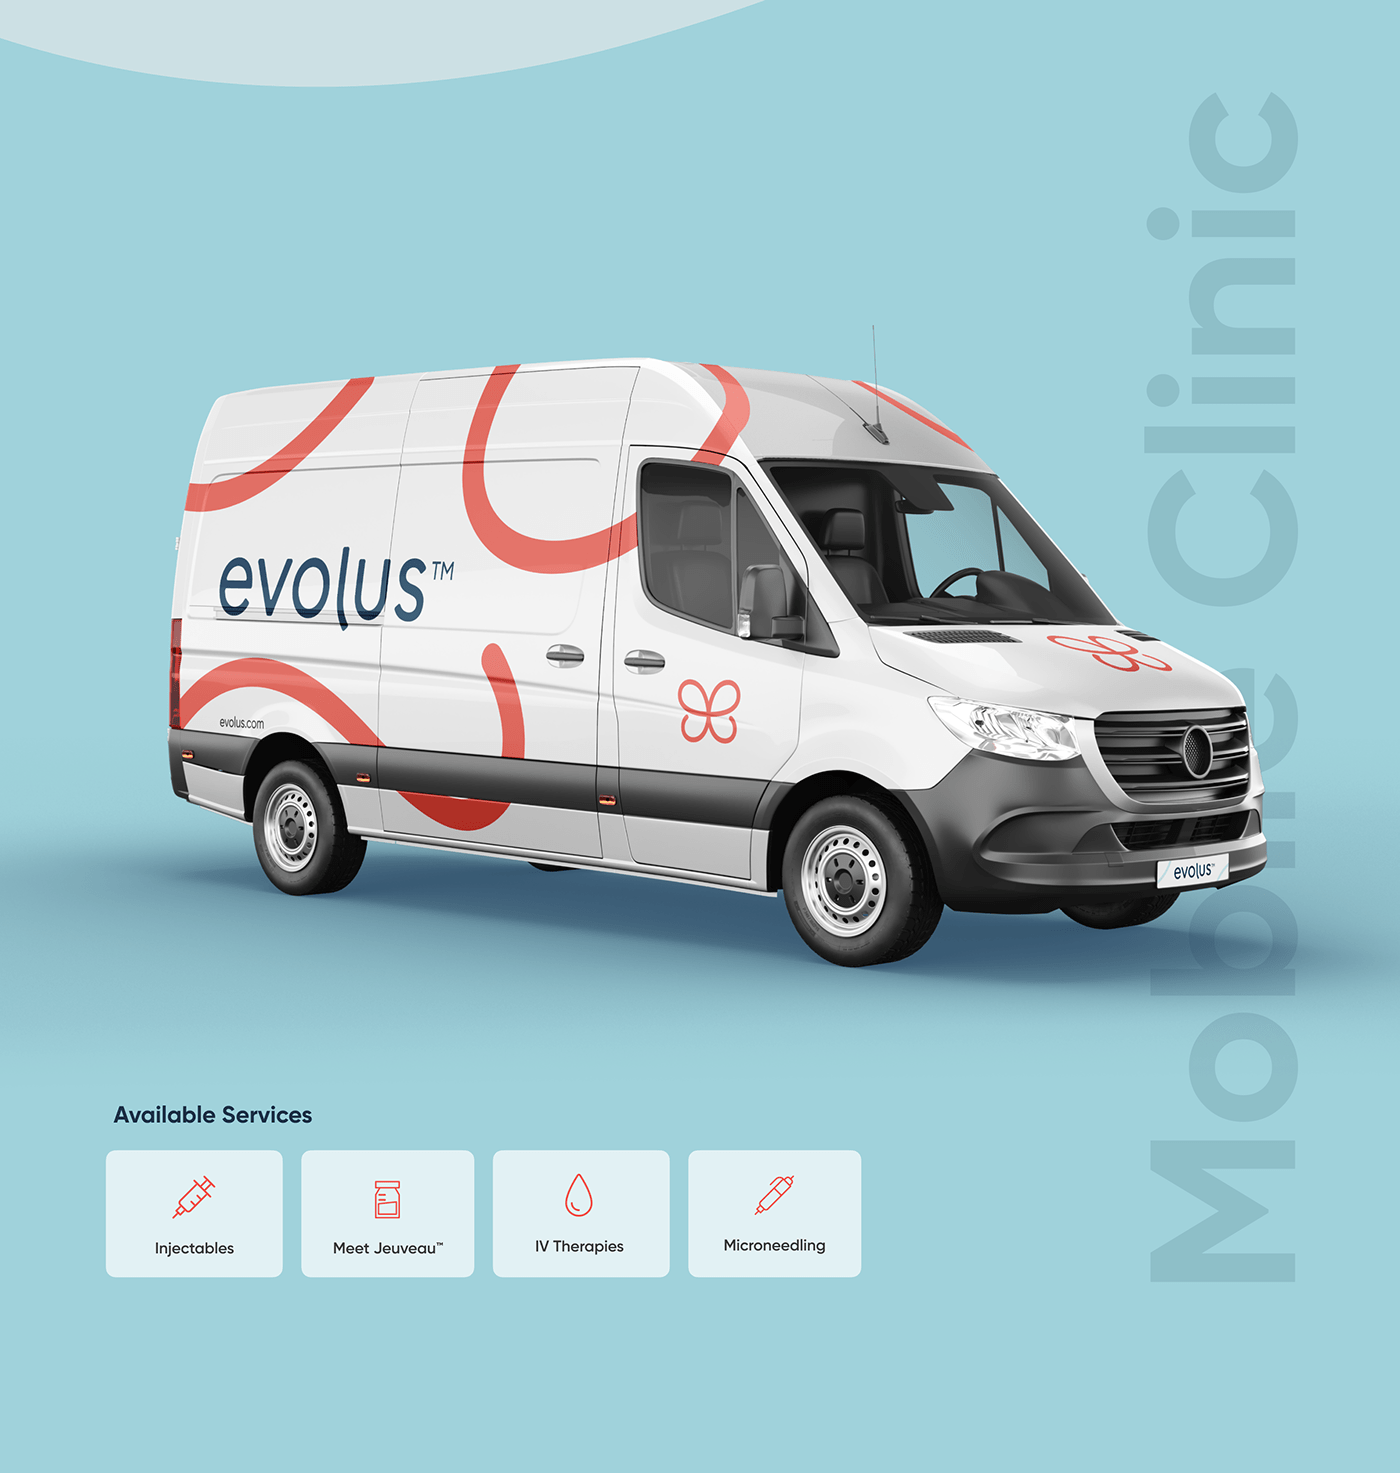 Branded delivery van displaying Evolus’s logo, primary color, and motif based on the symbol.